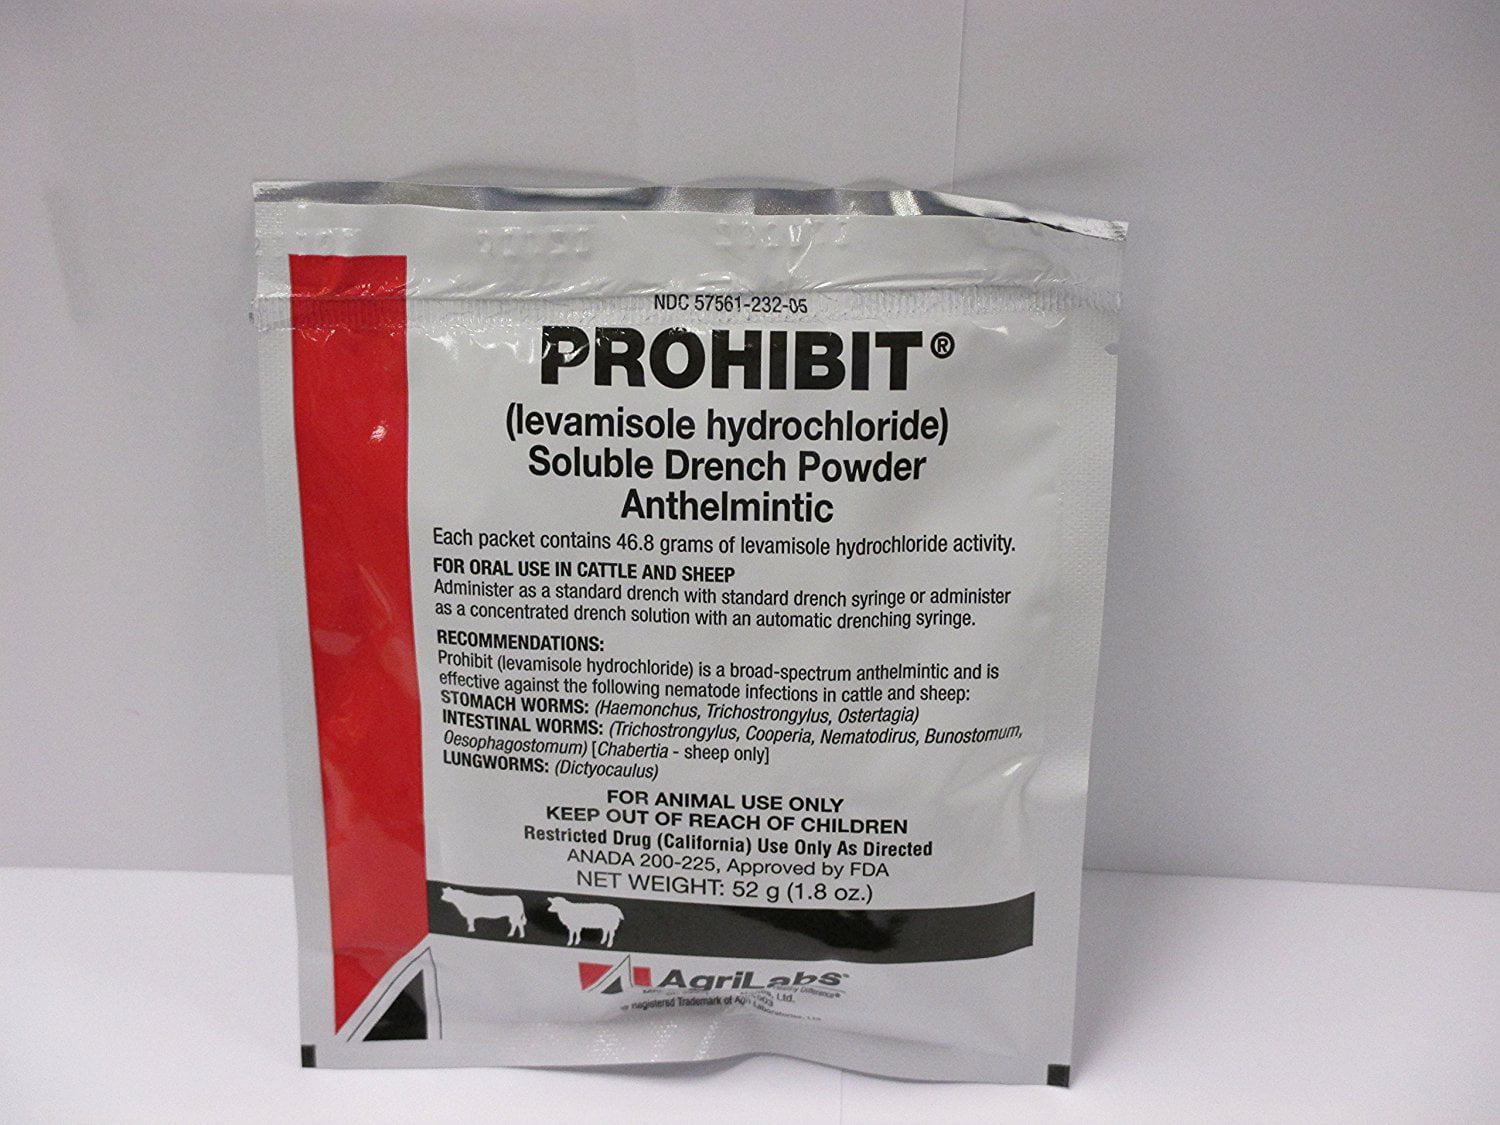 Agrilabs Prohibit Soluble Drench Powder Anthelmintic 52g for sale online 